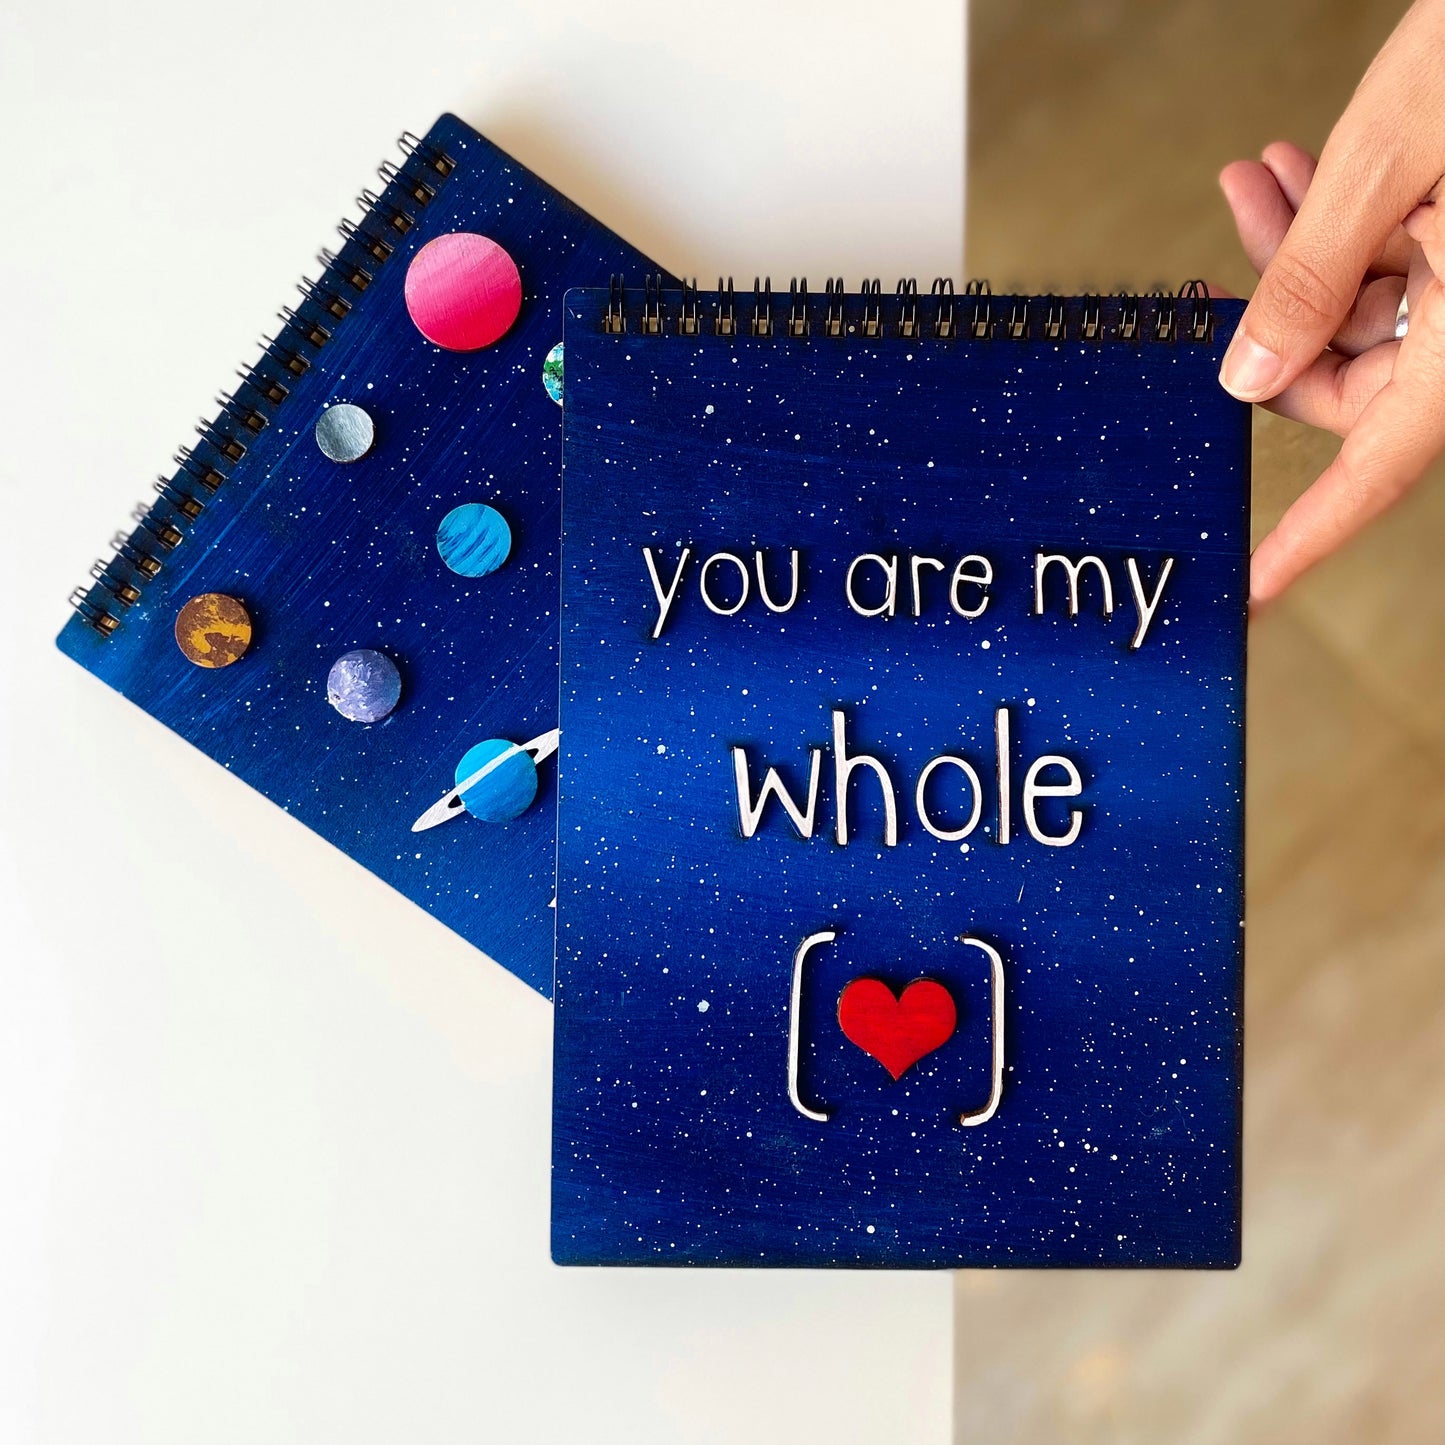 "You are my whole" Notebook